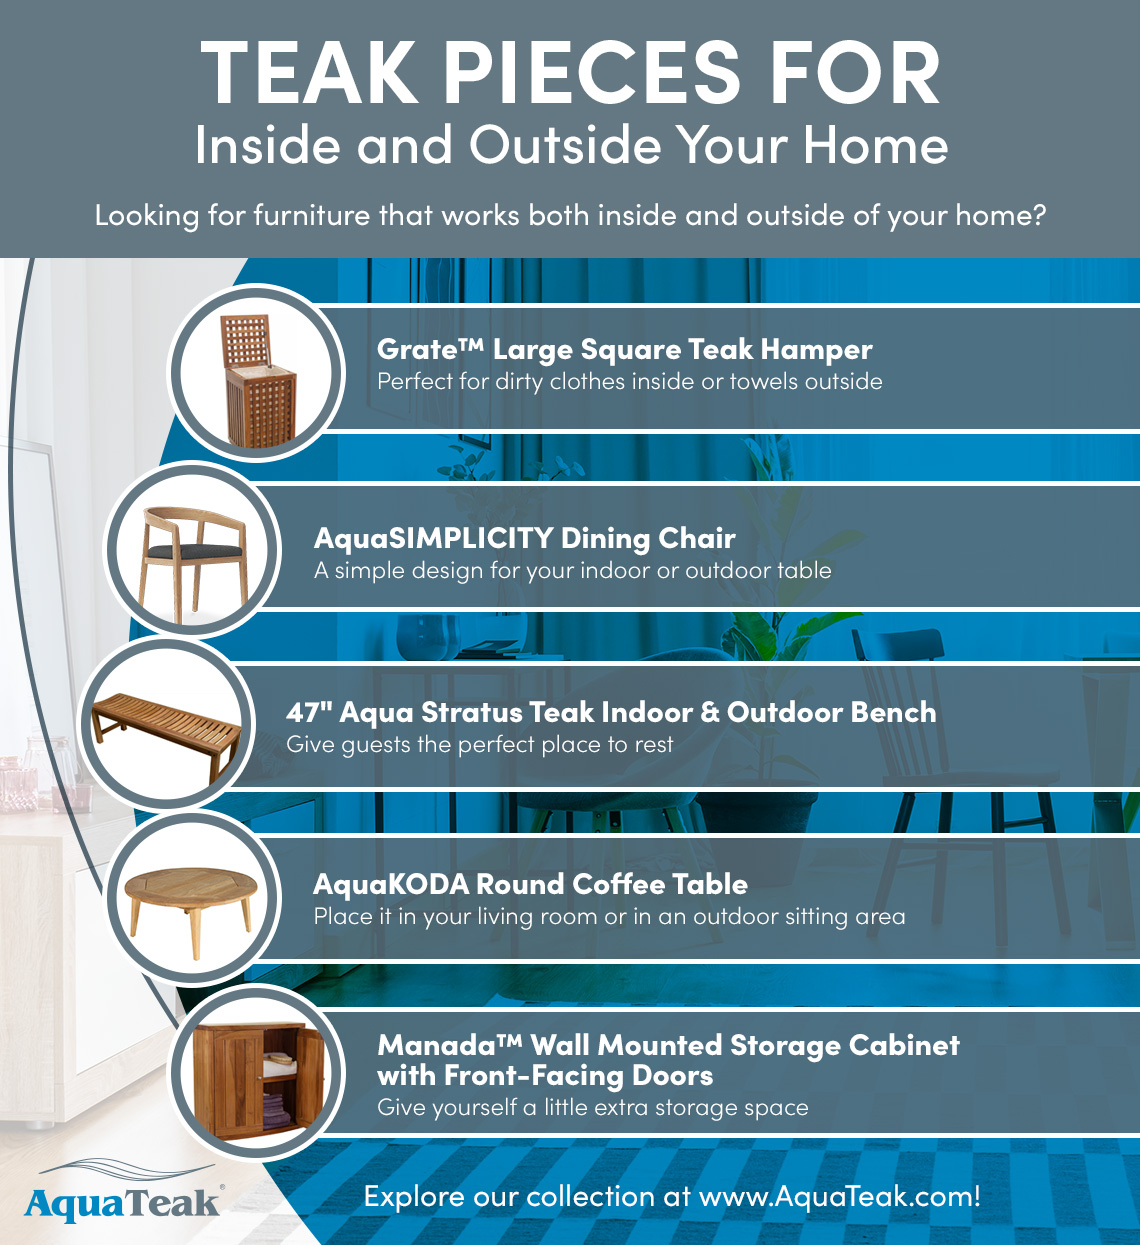 Teak Pieces for Inside and Outside Your Home Infographic